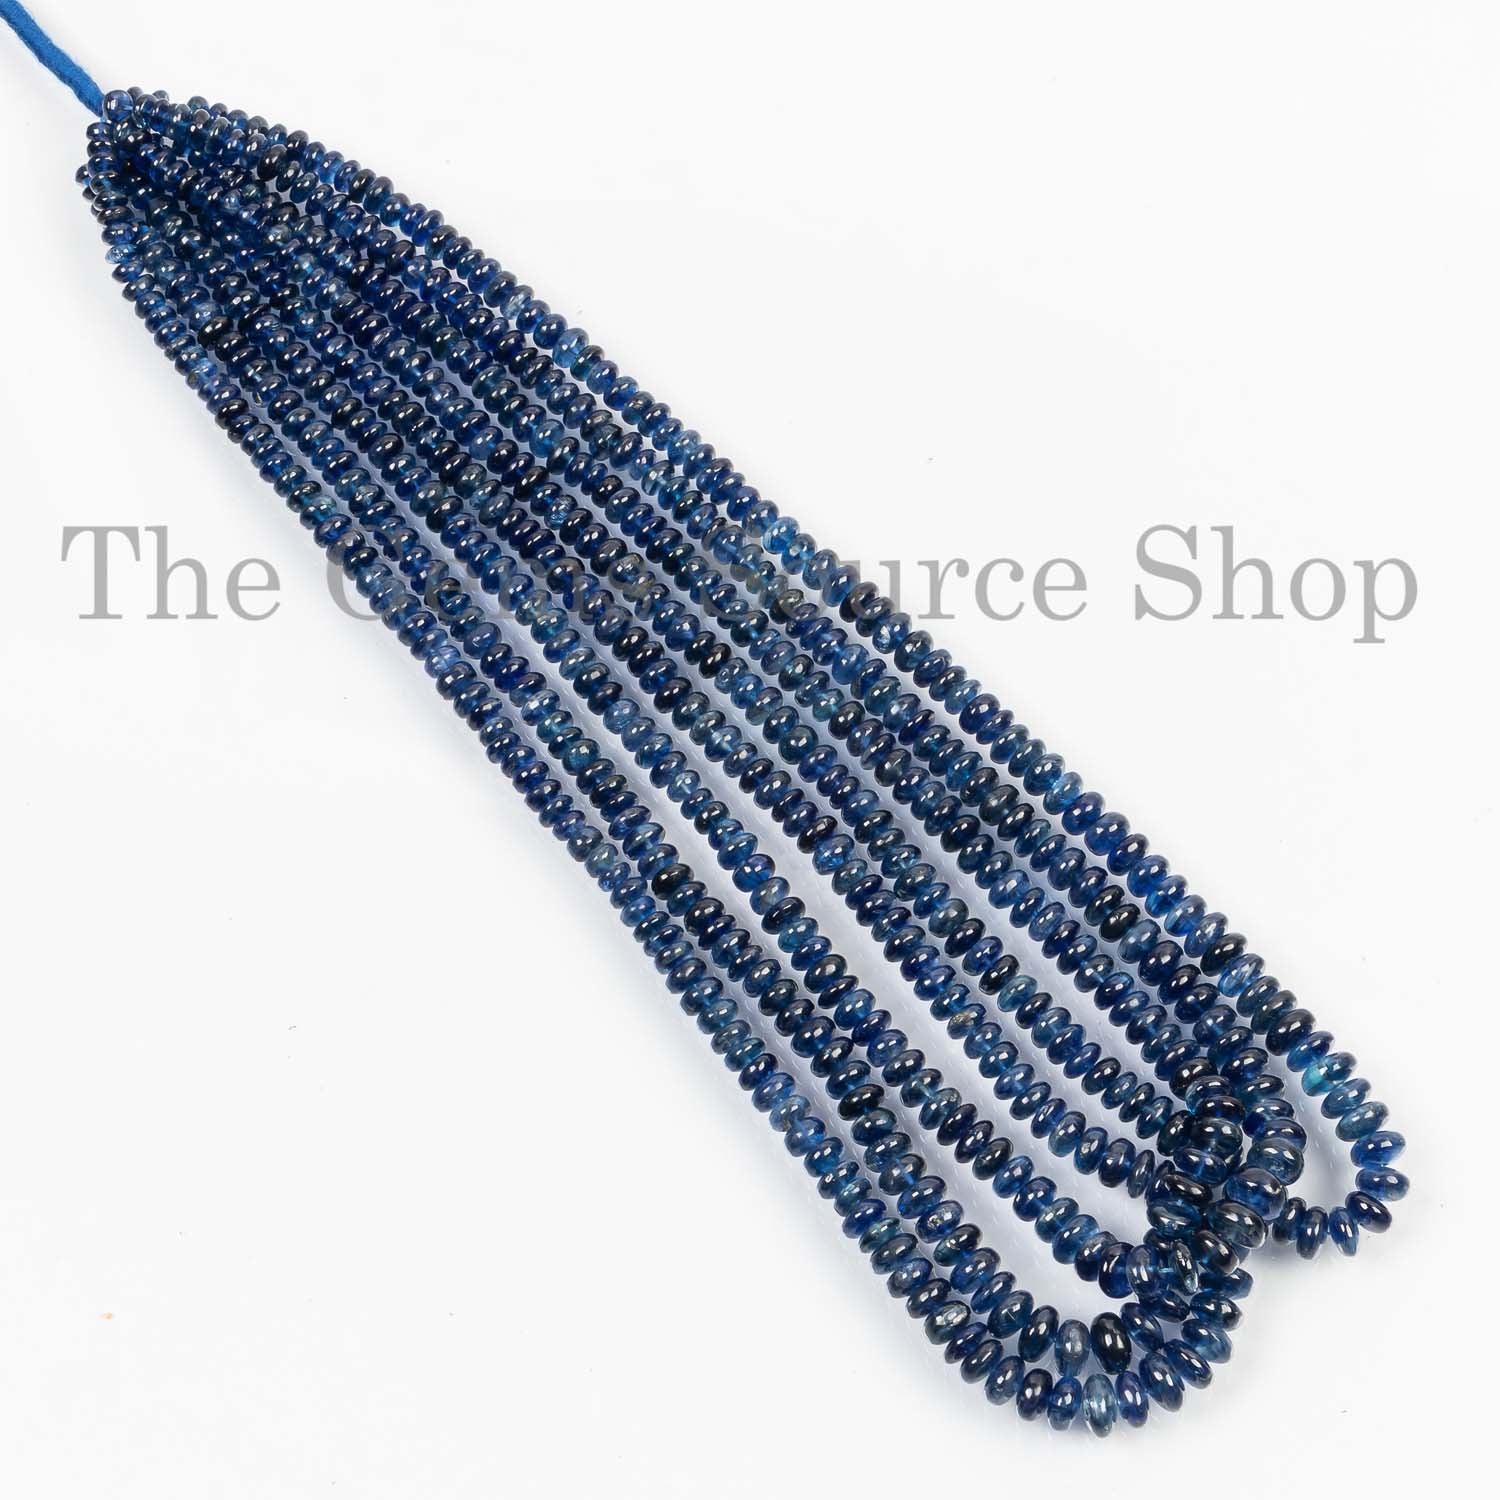 Kyanite Smooth Rondelle Beads, 4-6 mm Kyanite Beads For Making Jewelry